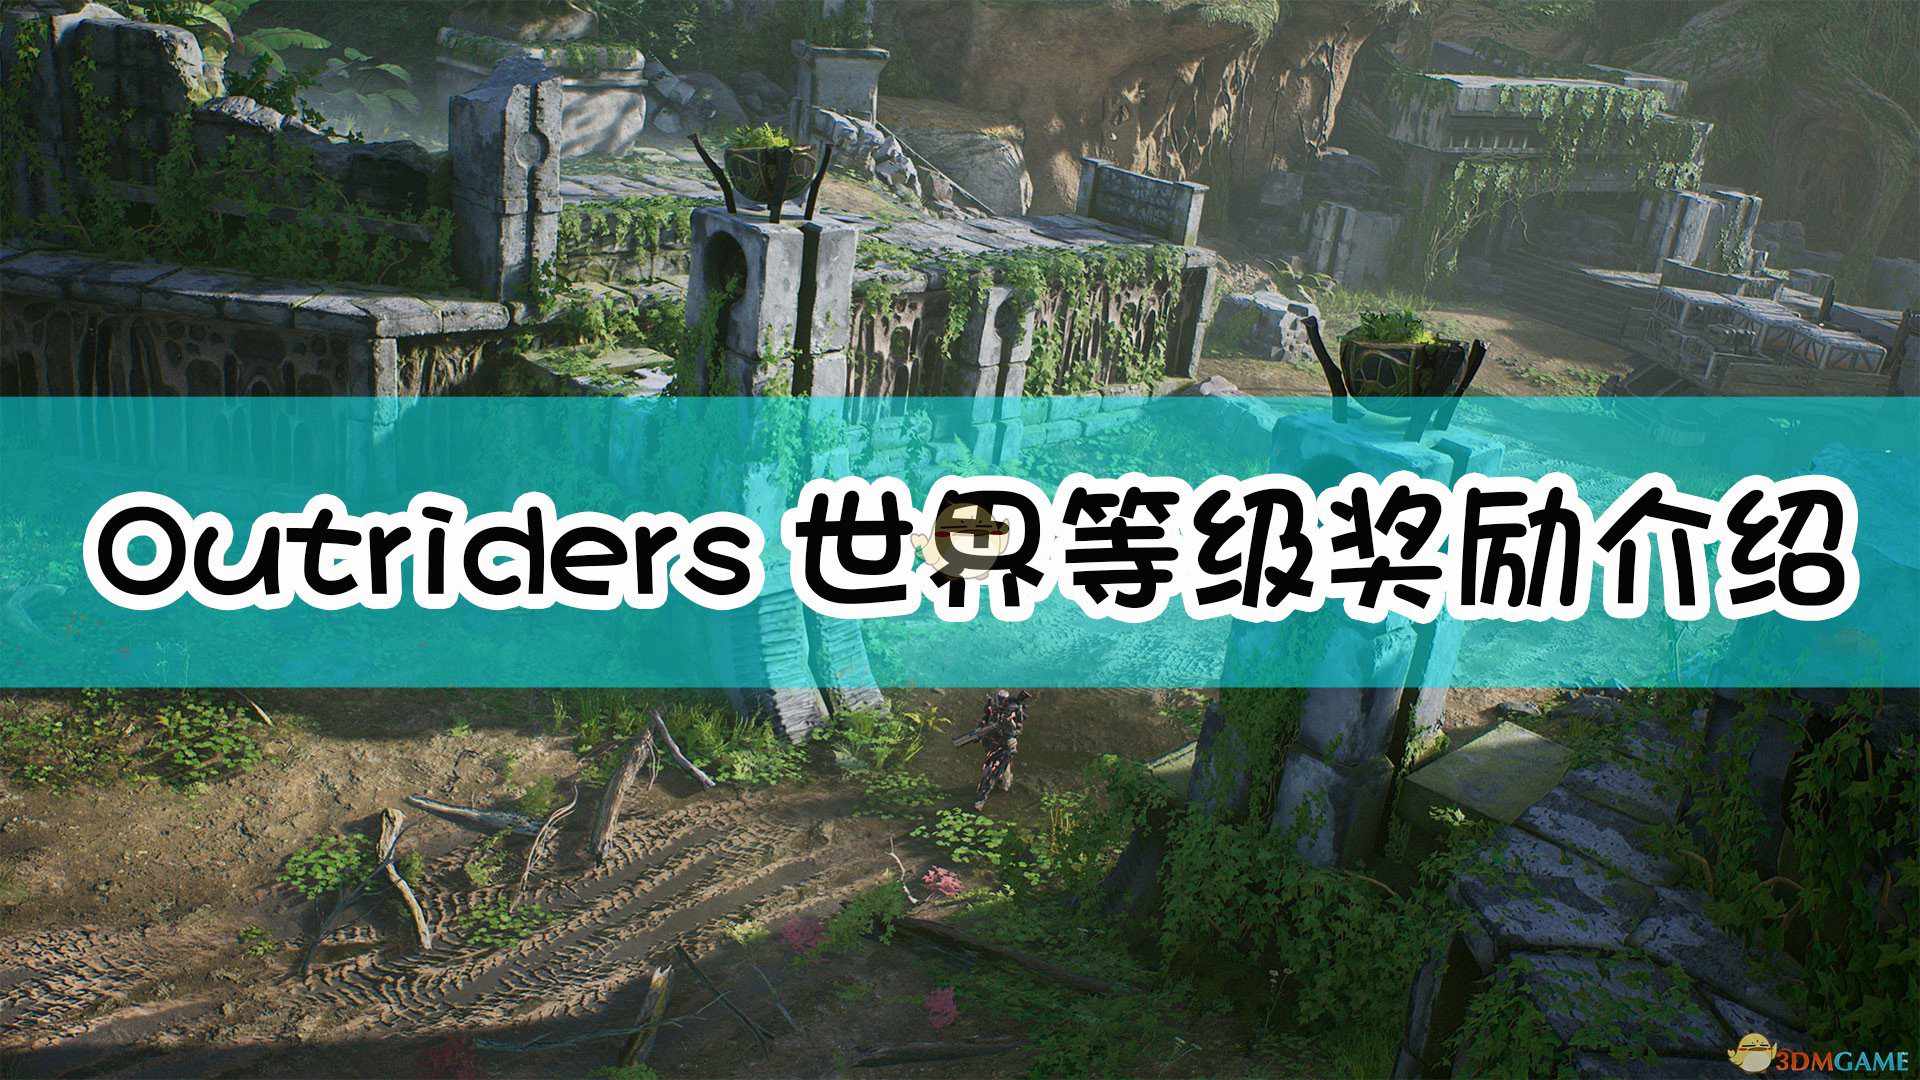 《Outriders》世界等级奖励介绍